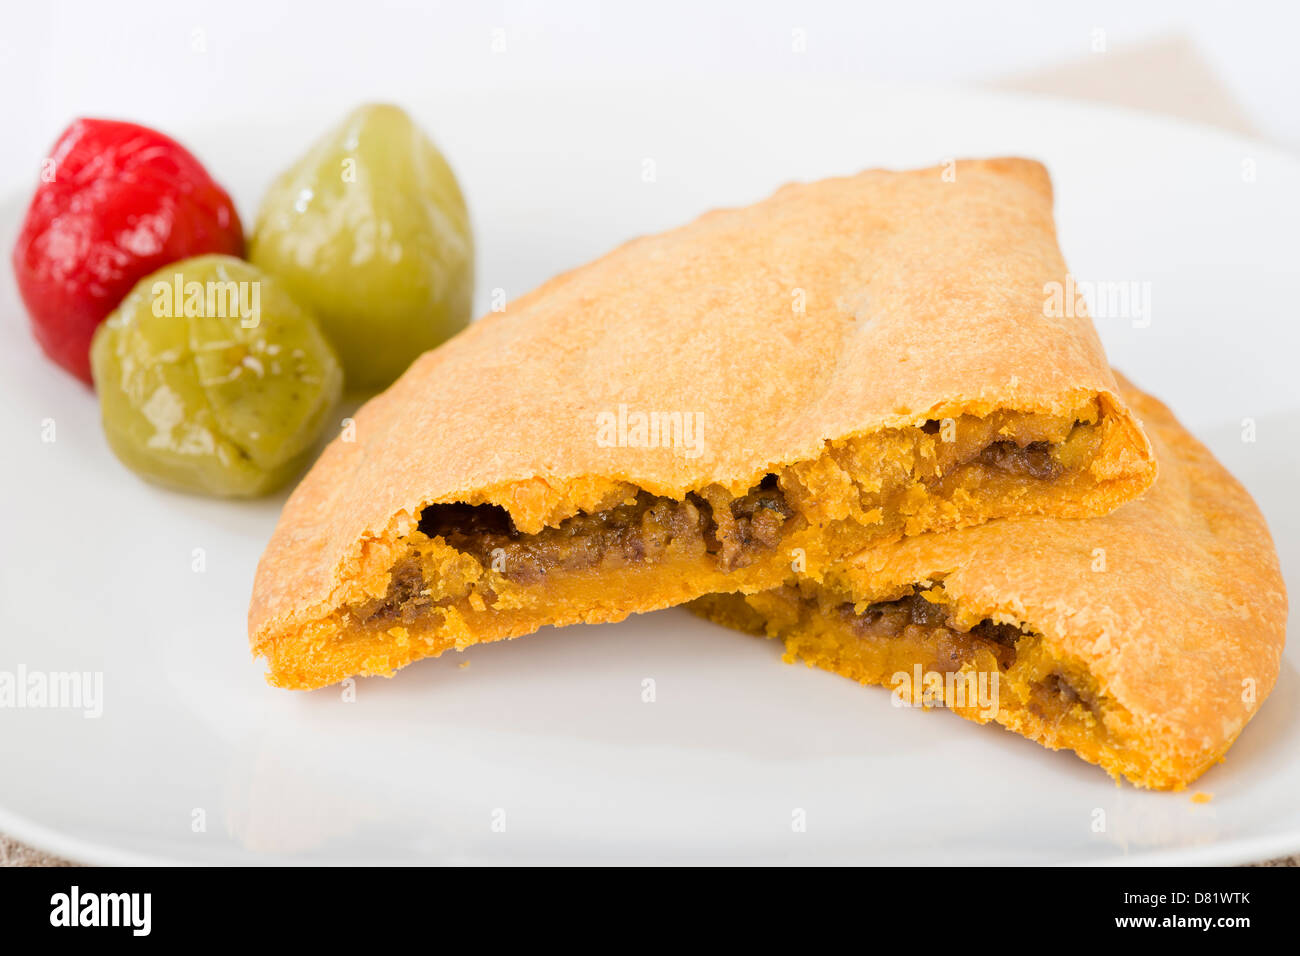 https://c8.alamy.com/comp/D81WTK/caribbean-lamb-pattie-jamaican-spicy-minced-lamb-with-onions-and-peppers-D81WTK.jpg